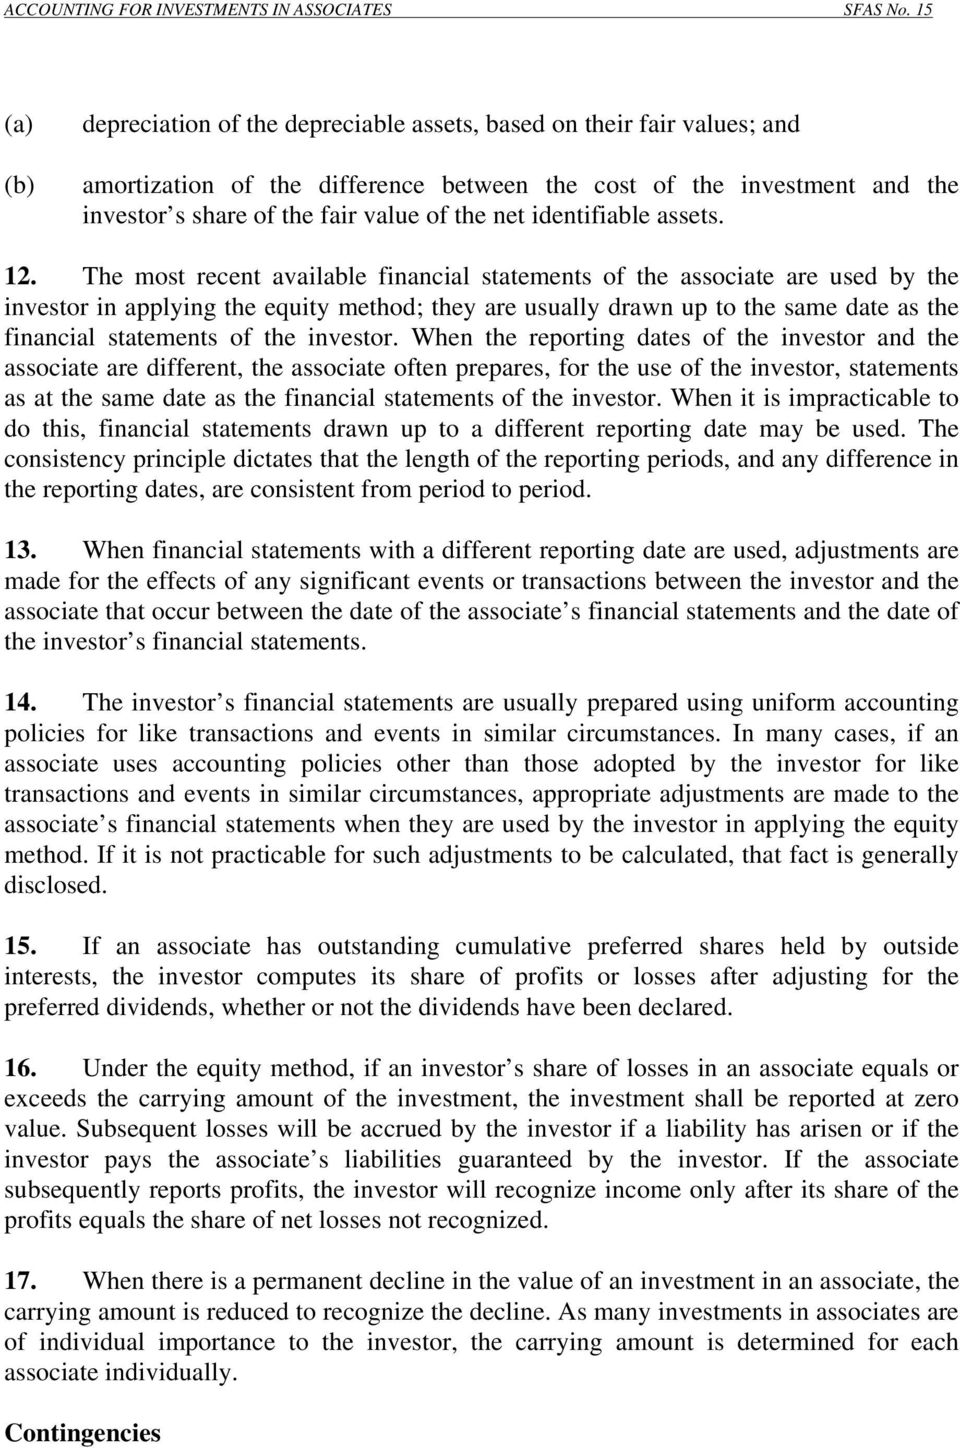 The most recent available financial statements of the associate are used by the investor in applying the equity method; they are usually drawn up to the same date as the financial statements of the